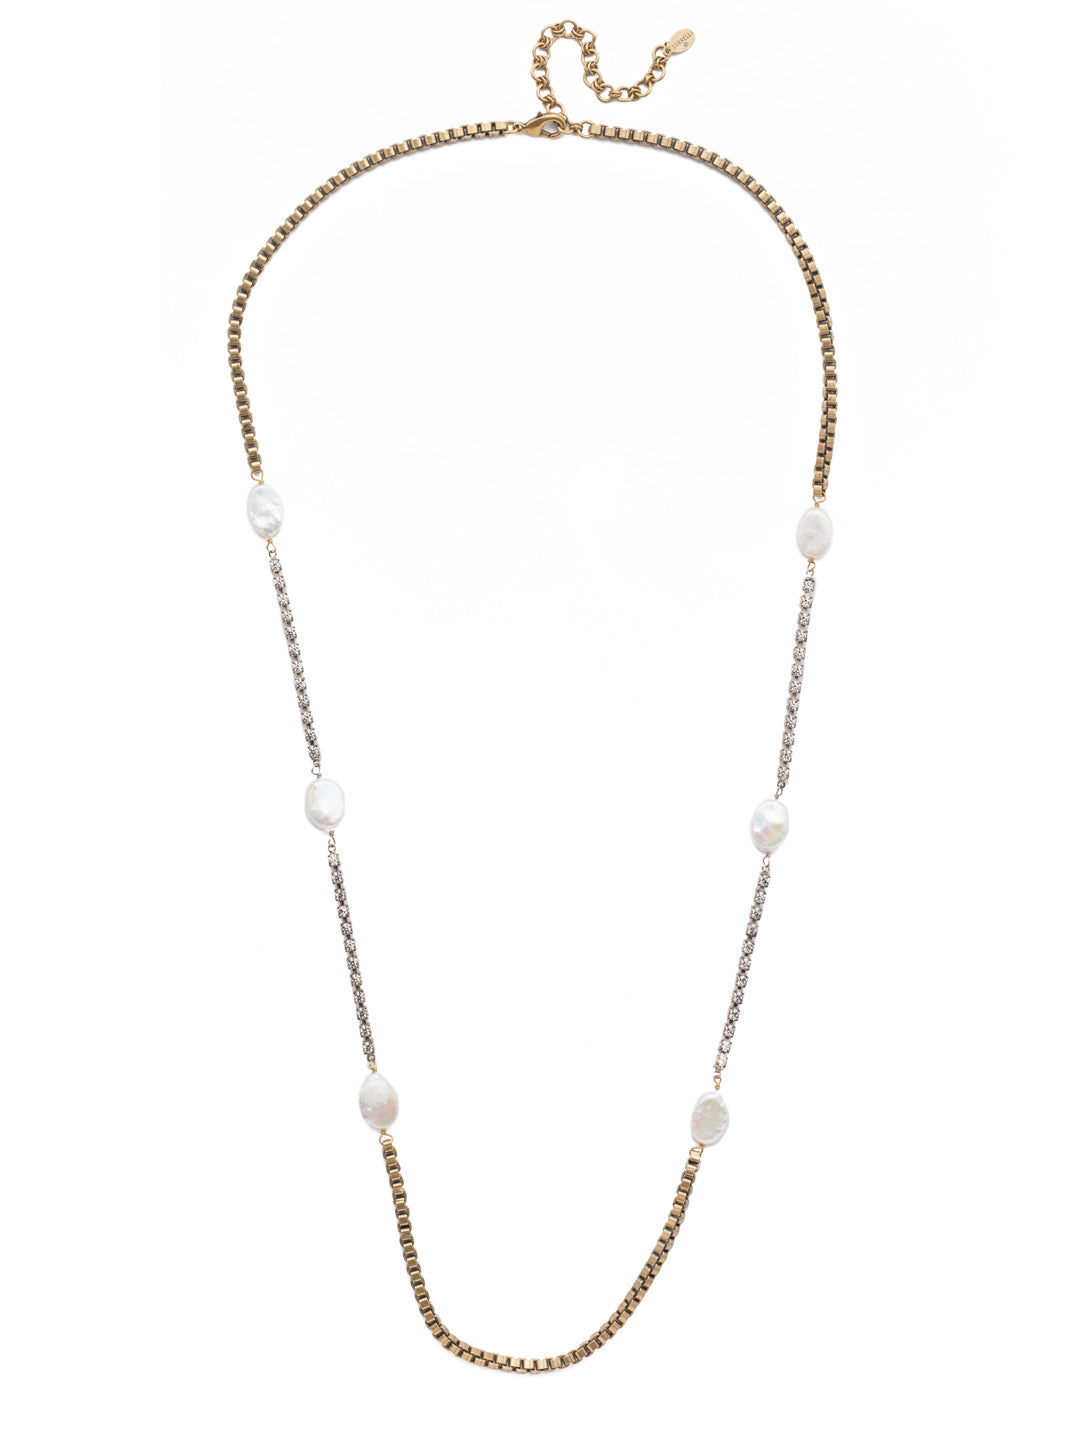 Catcher Long Necklace - 4NES7MXMDP - <p>Put on the Catcher Long Necklace when you don't want to commit to a single style. It's got edgy metalwork, rows of sparkling crystals and pretty freshwater pearls, too. From Sorrelli's Modern Pearl collection in our Mixed Metal finish.</p>